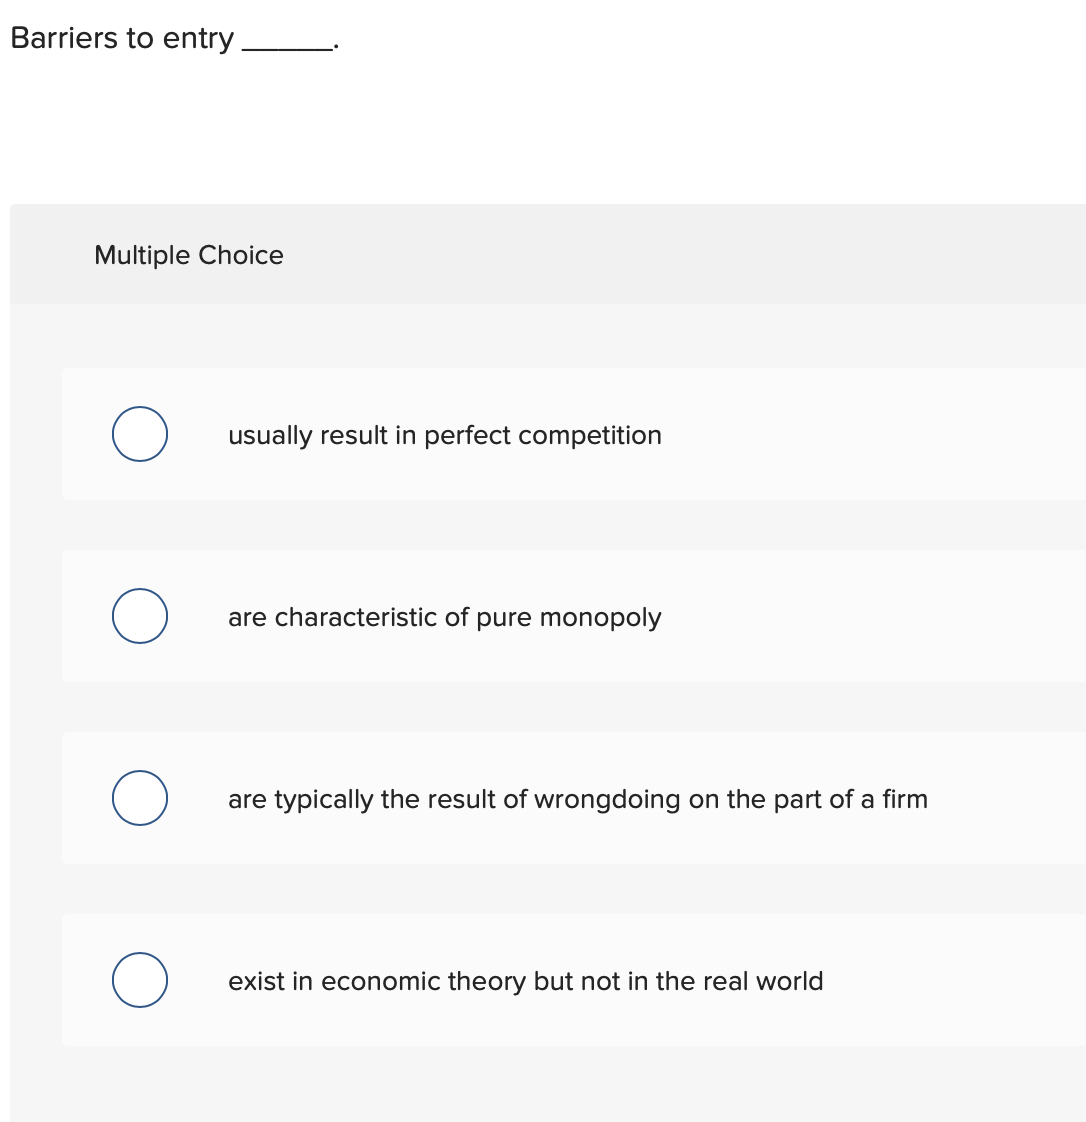 Barriers to entry
Multiple Choice
usually result in perfect competition
are characteristic of pure monopoly
are typically the result of wrongdoing on the part of a firm
exist in economic theory but not in the real world
